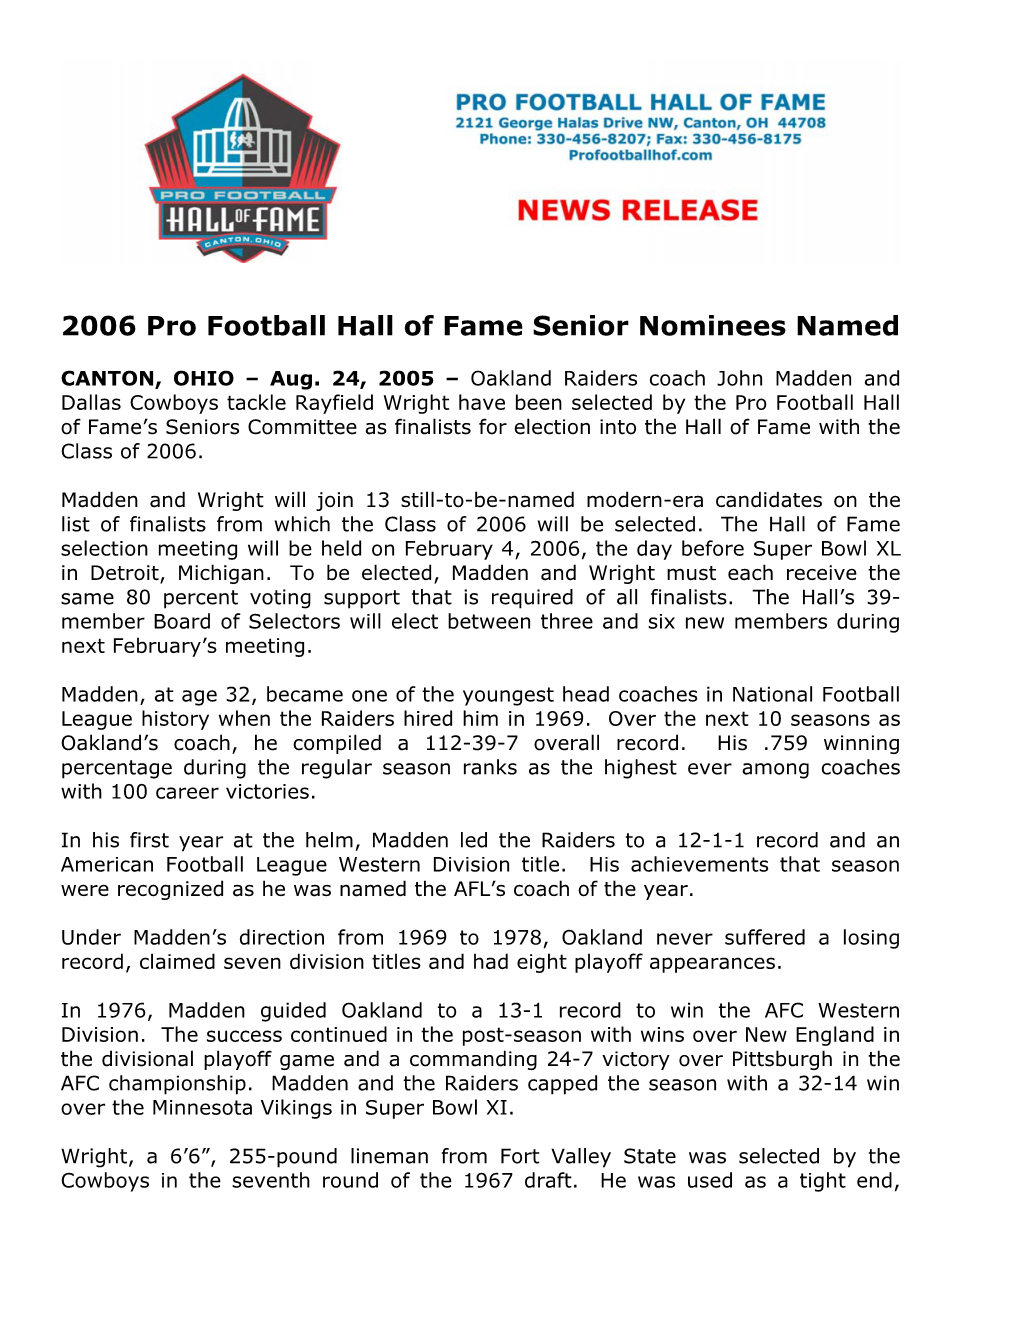 2006 Pro Football Hall of Fame Senior Nominees Named